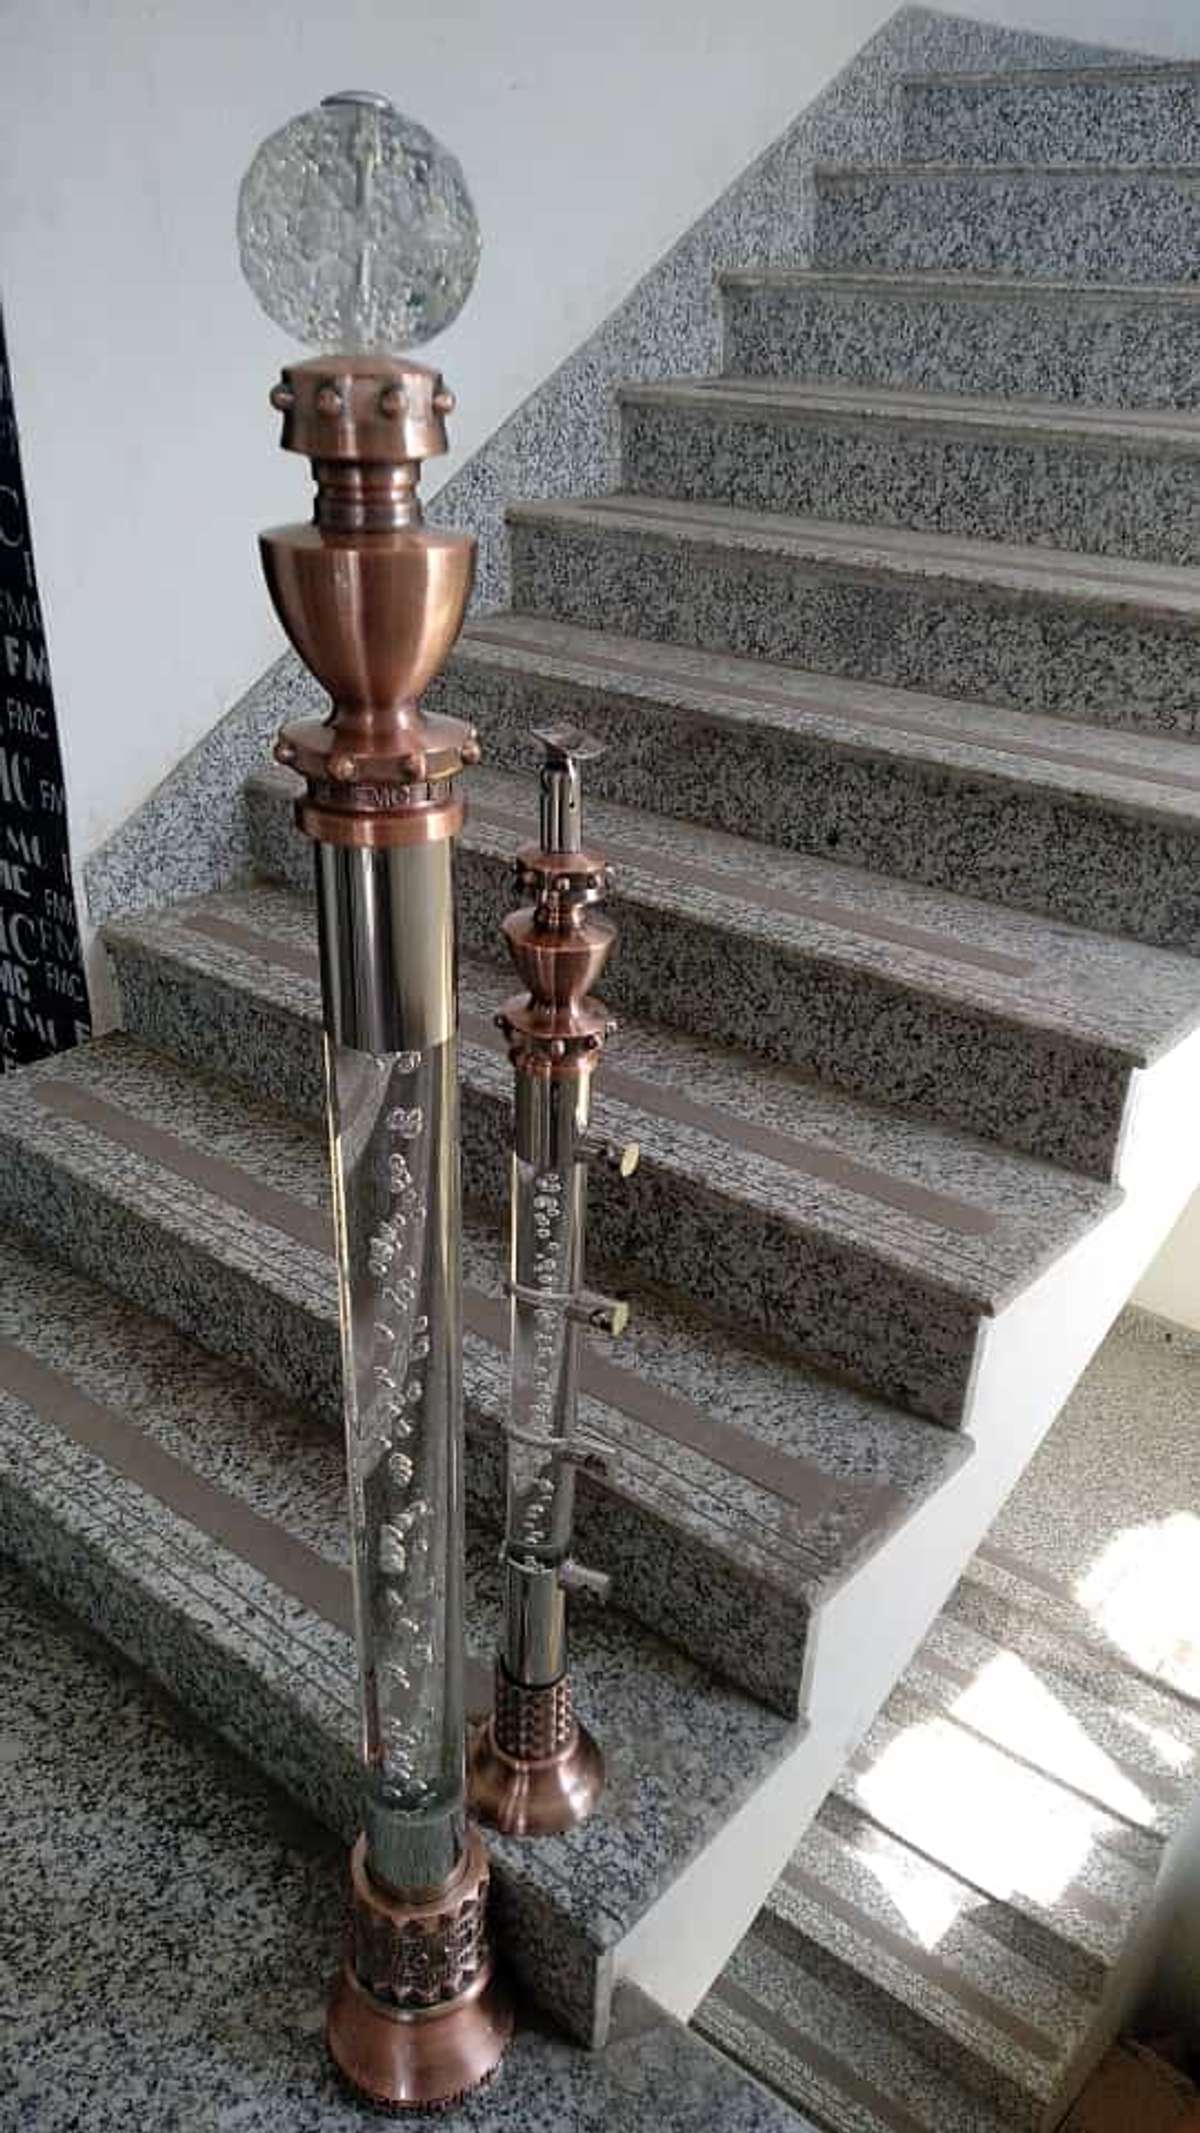 Royal designs,balusters,master posts,pipes and fittings all in rusty/gold,gold or in rose gold colors. #handrailsforkings